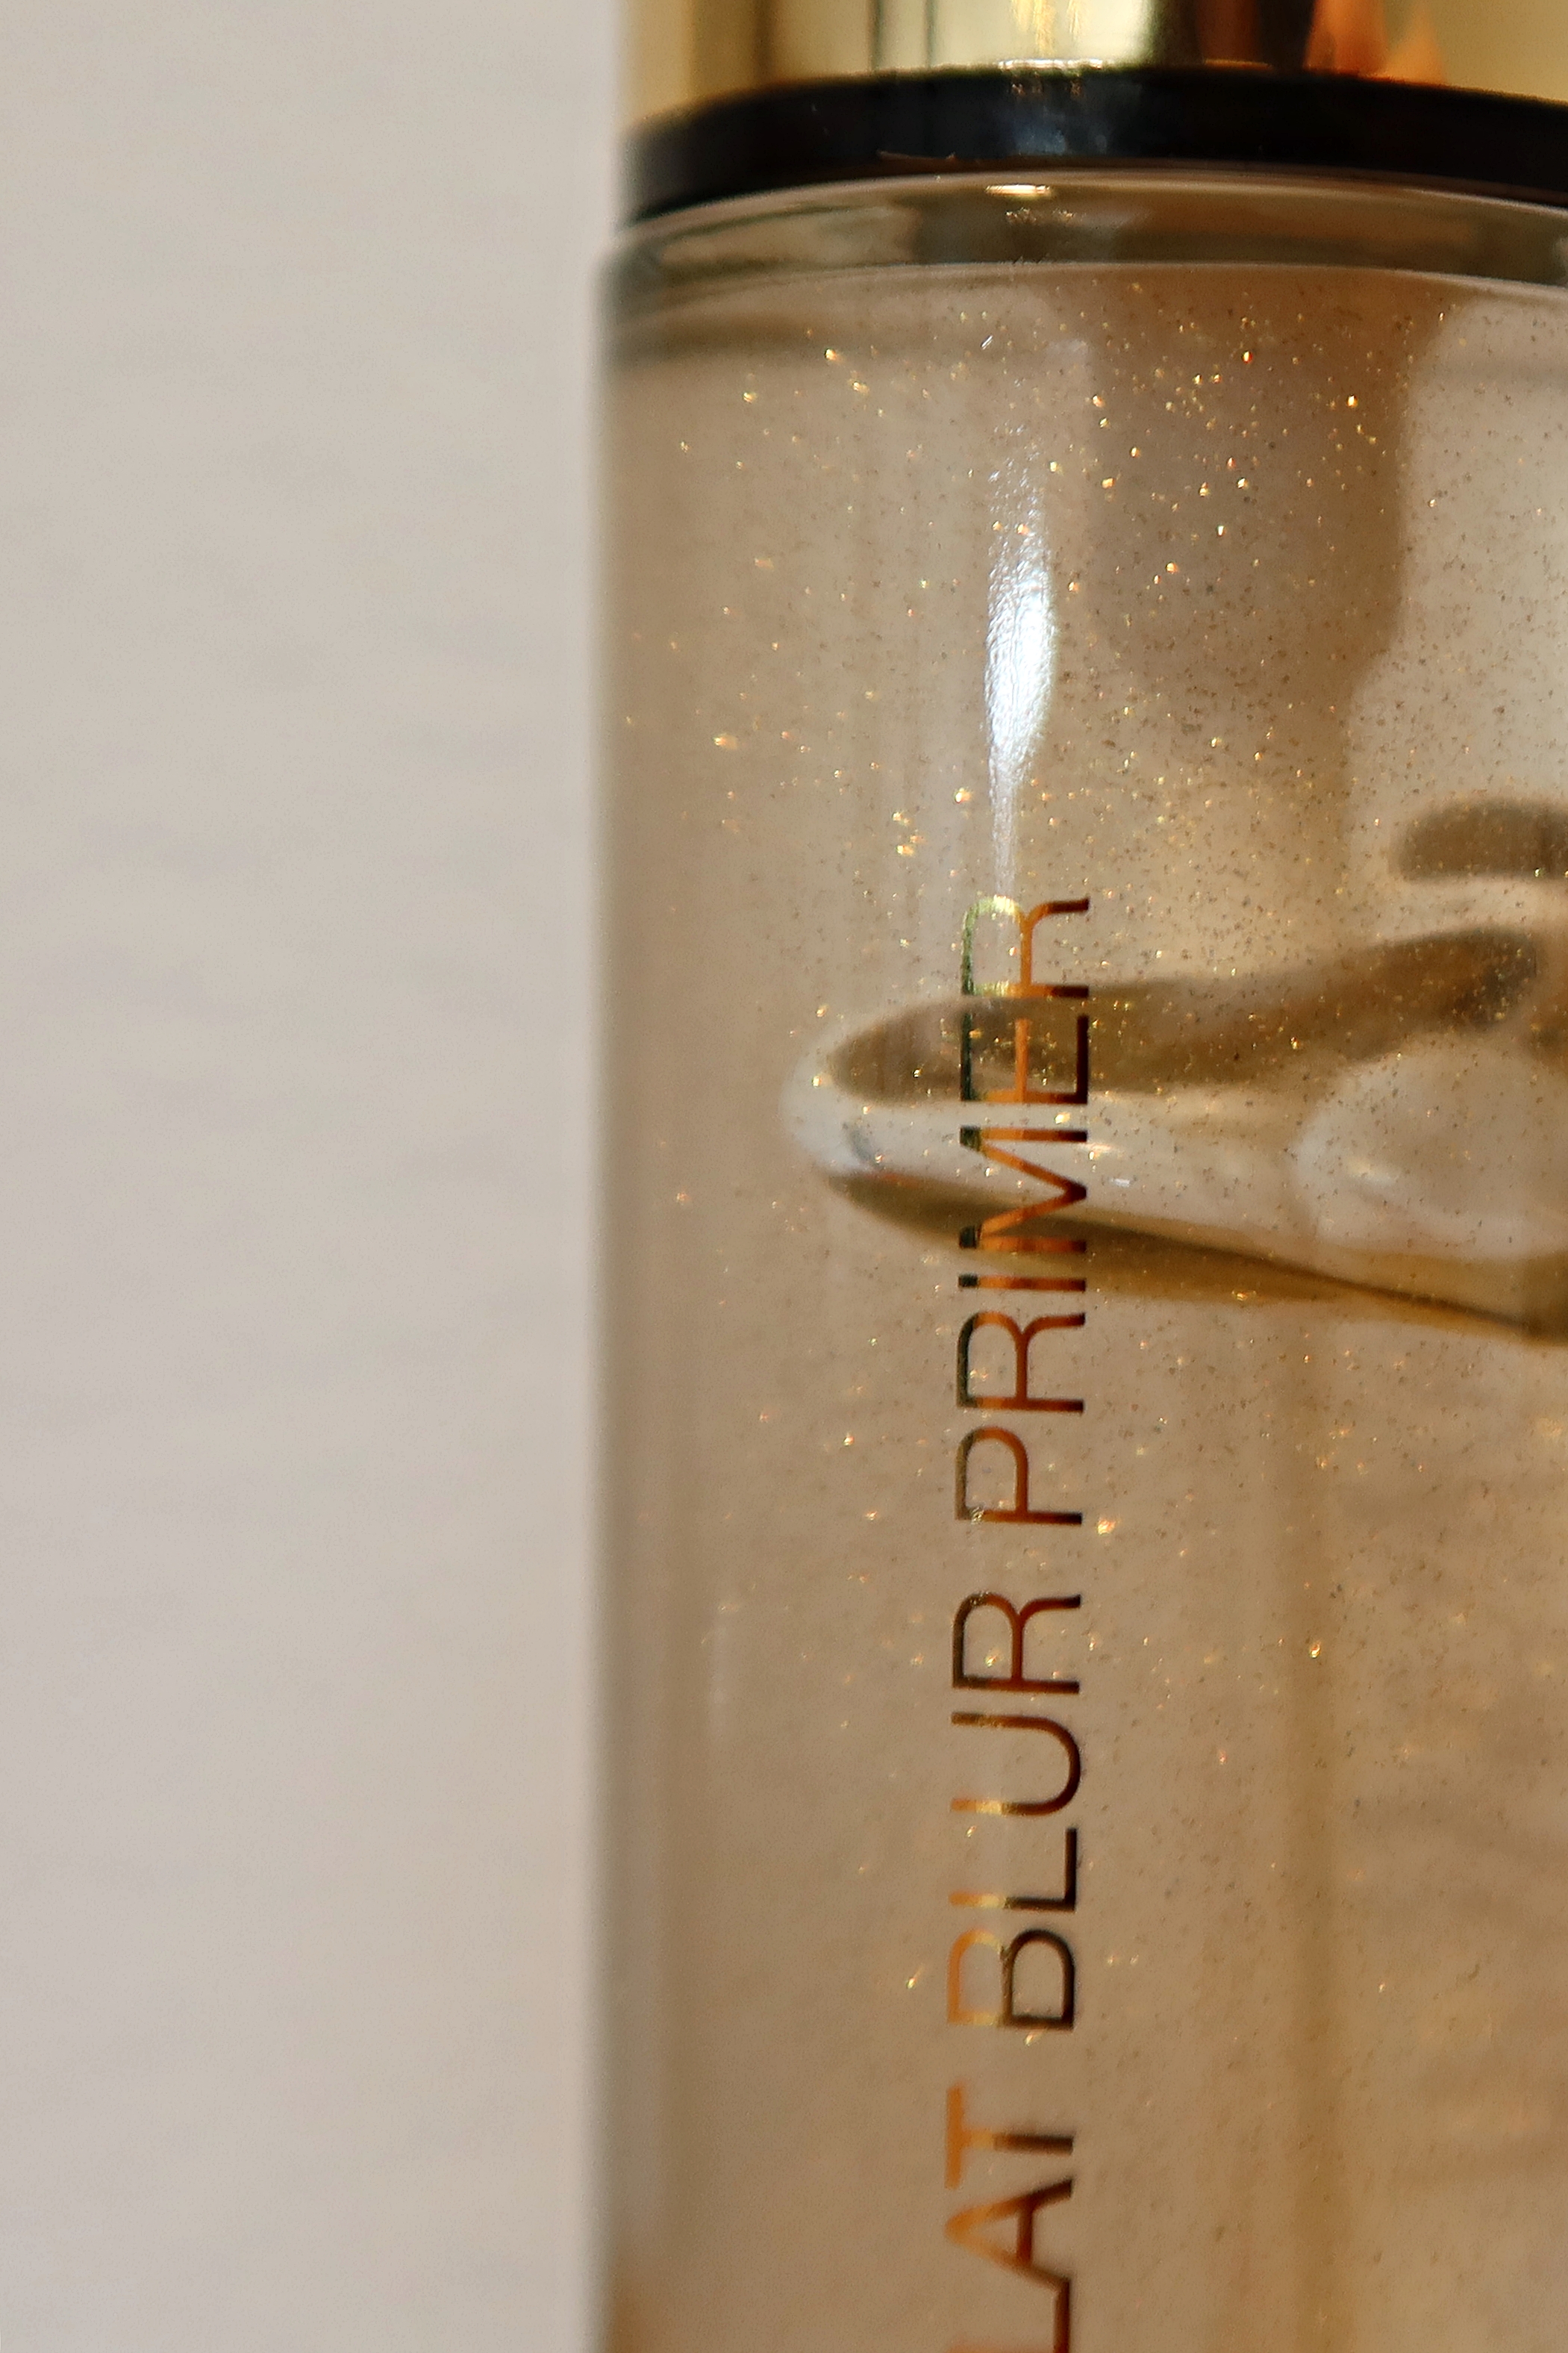 YSL Touche Eclat Blur Primer *SILVER* First Impressions, Combo Oily Skin